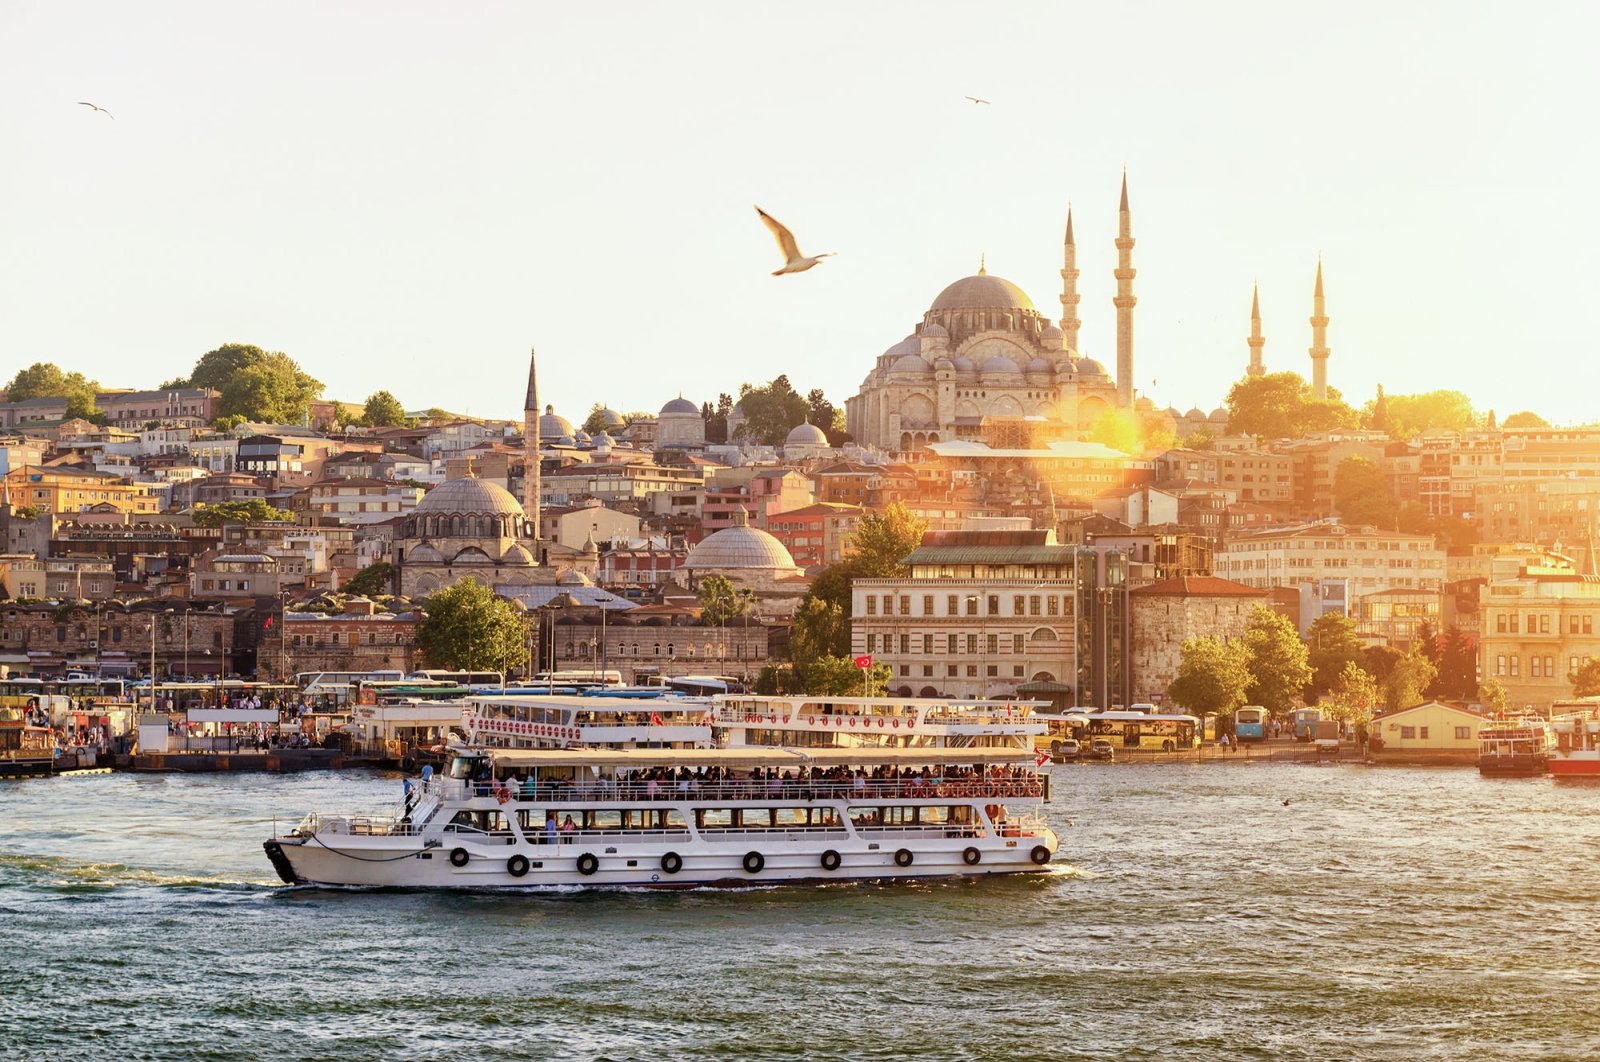 Istanbul at sunset, while tourist boat sails on the Golden Horn (Haliç), Istanbul, Turkey. (Shutterstock Photo)